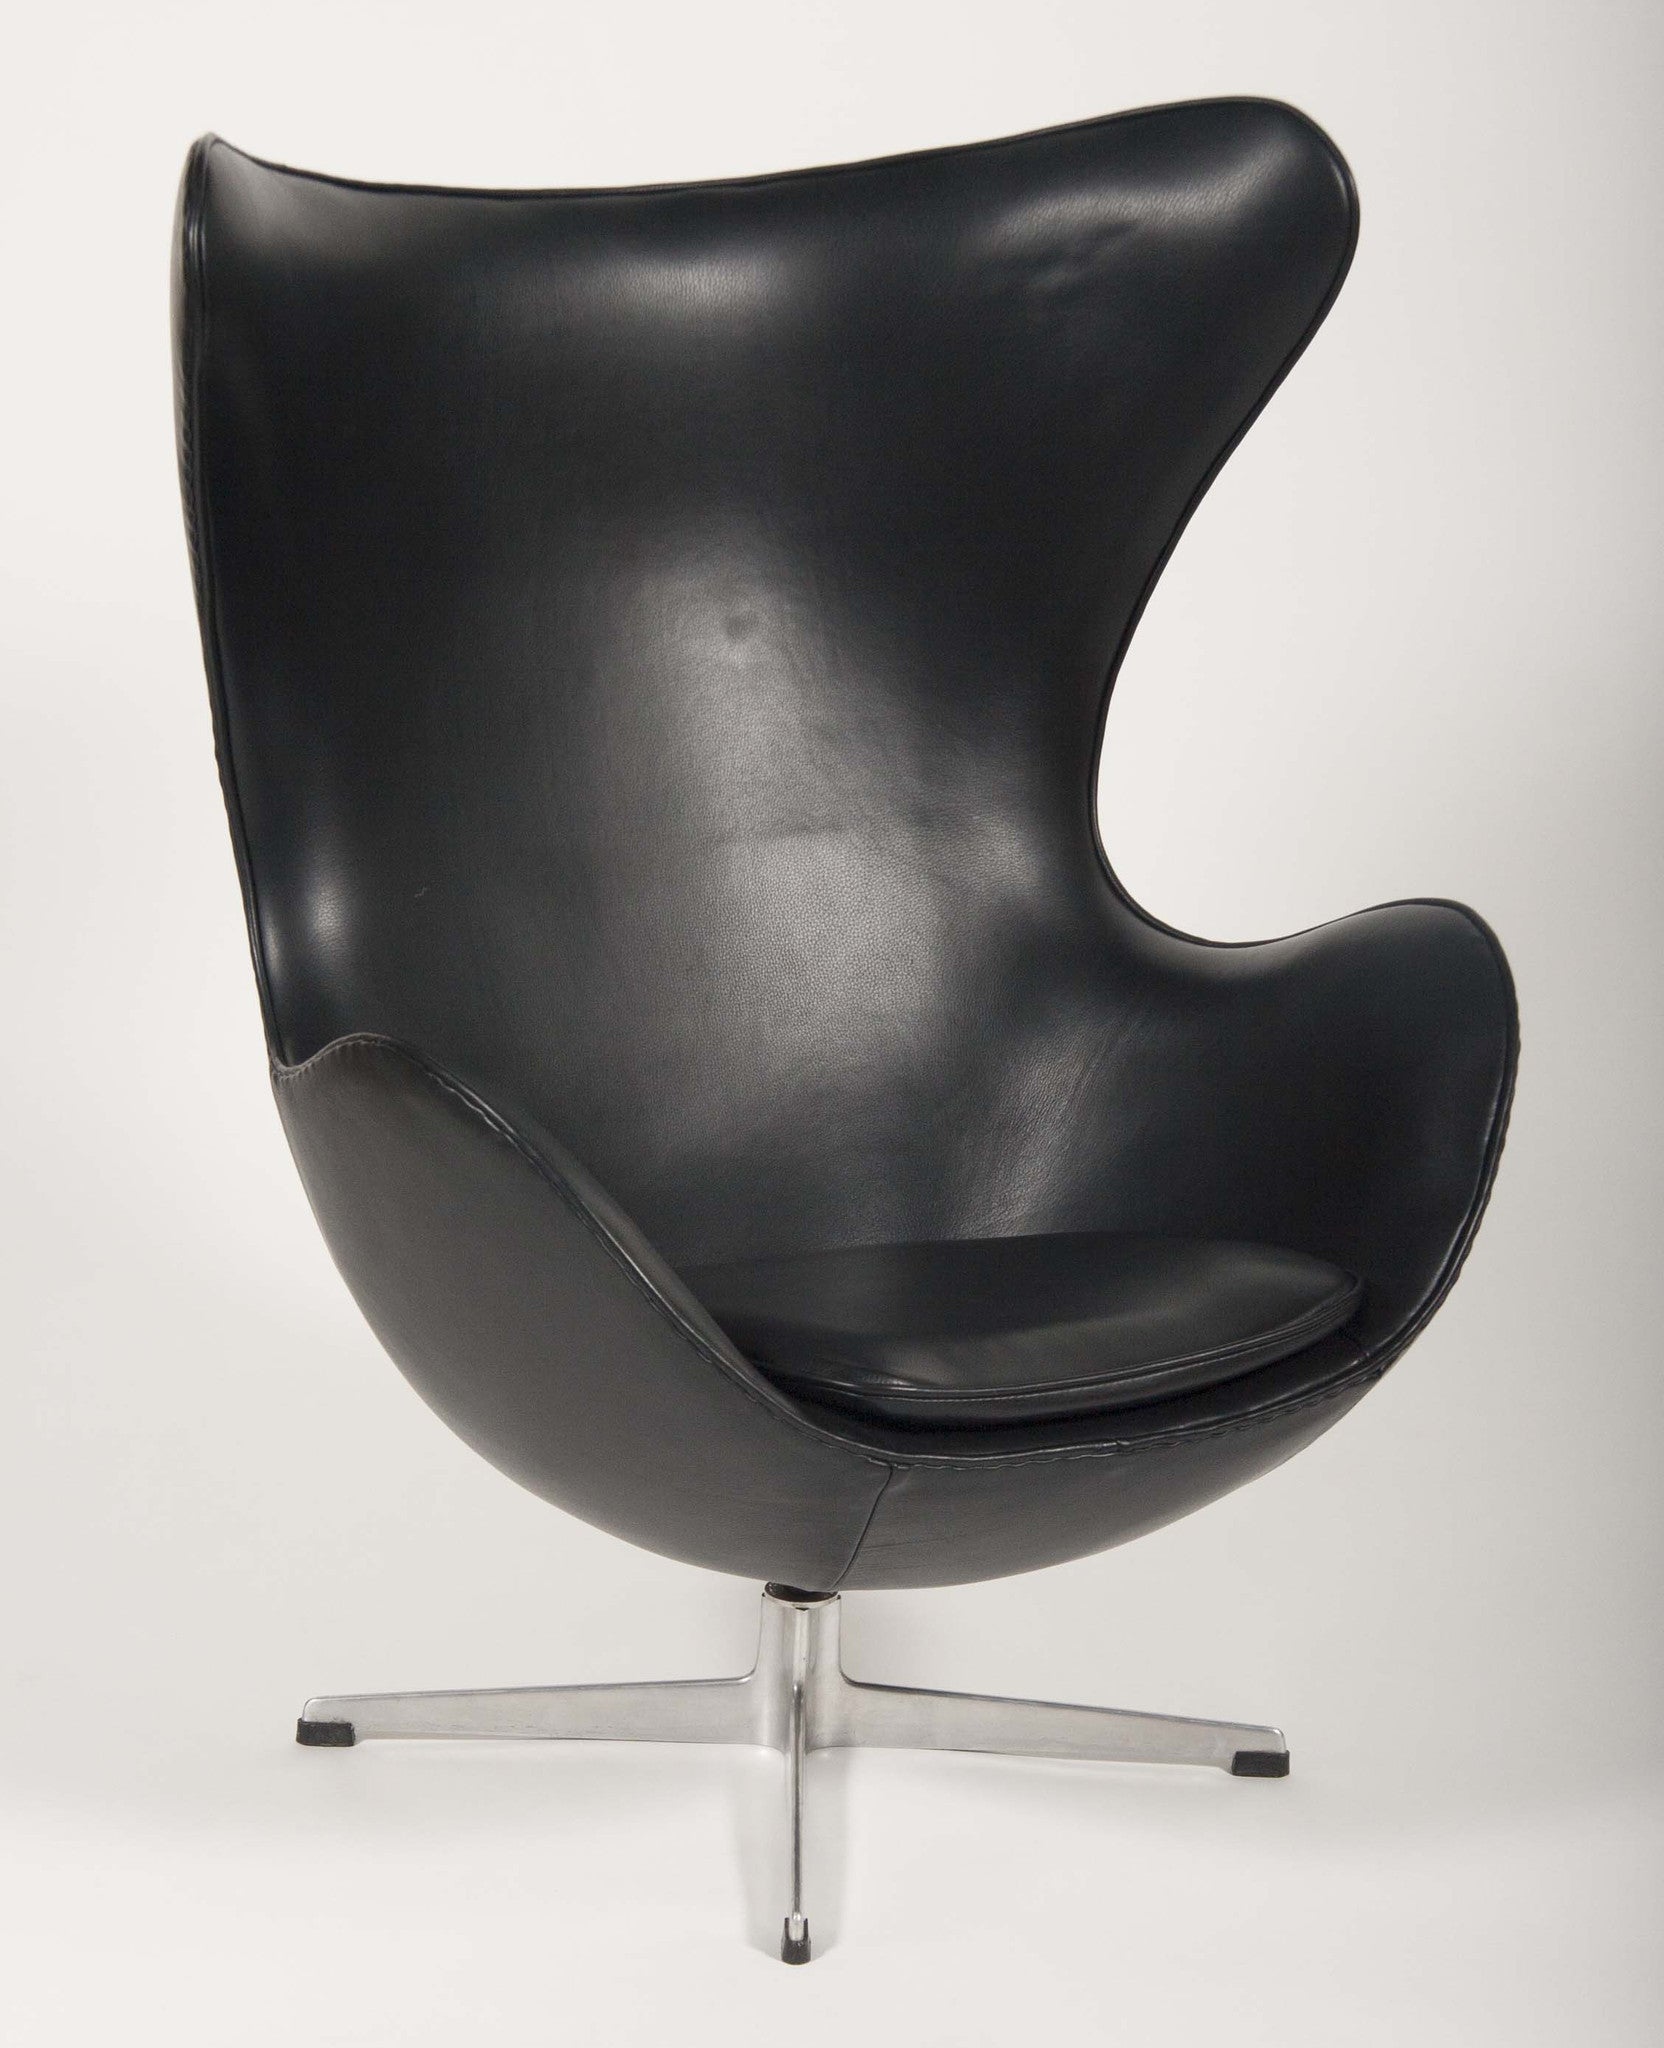 An Arne Jacobsen Egg Chair in Edelman Leather Avery & Dash Collections